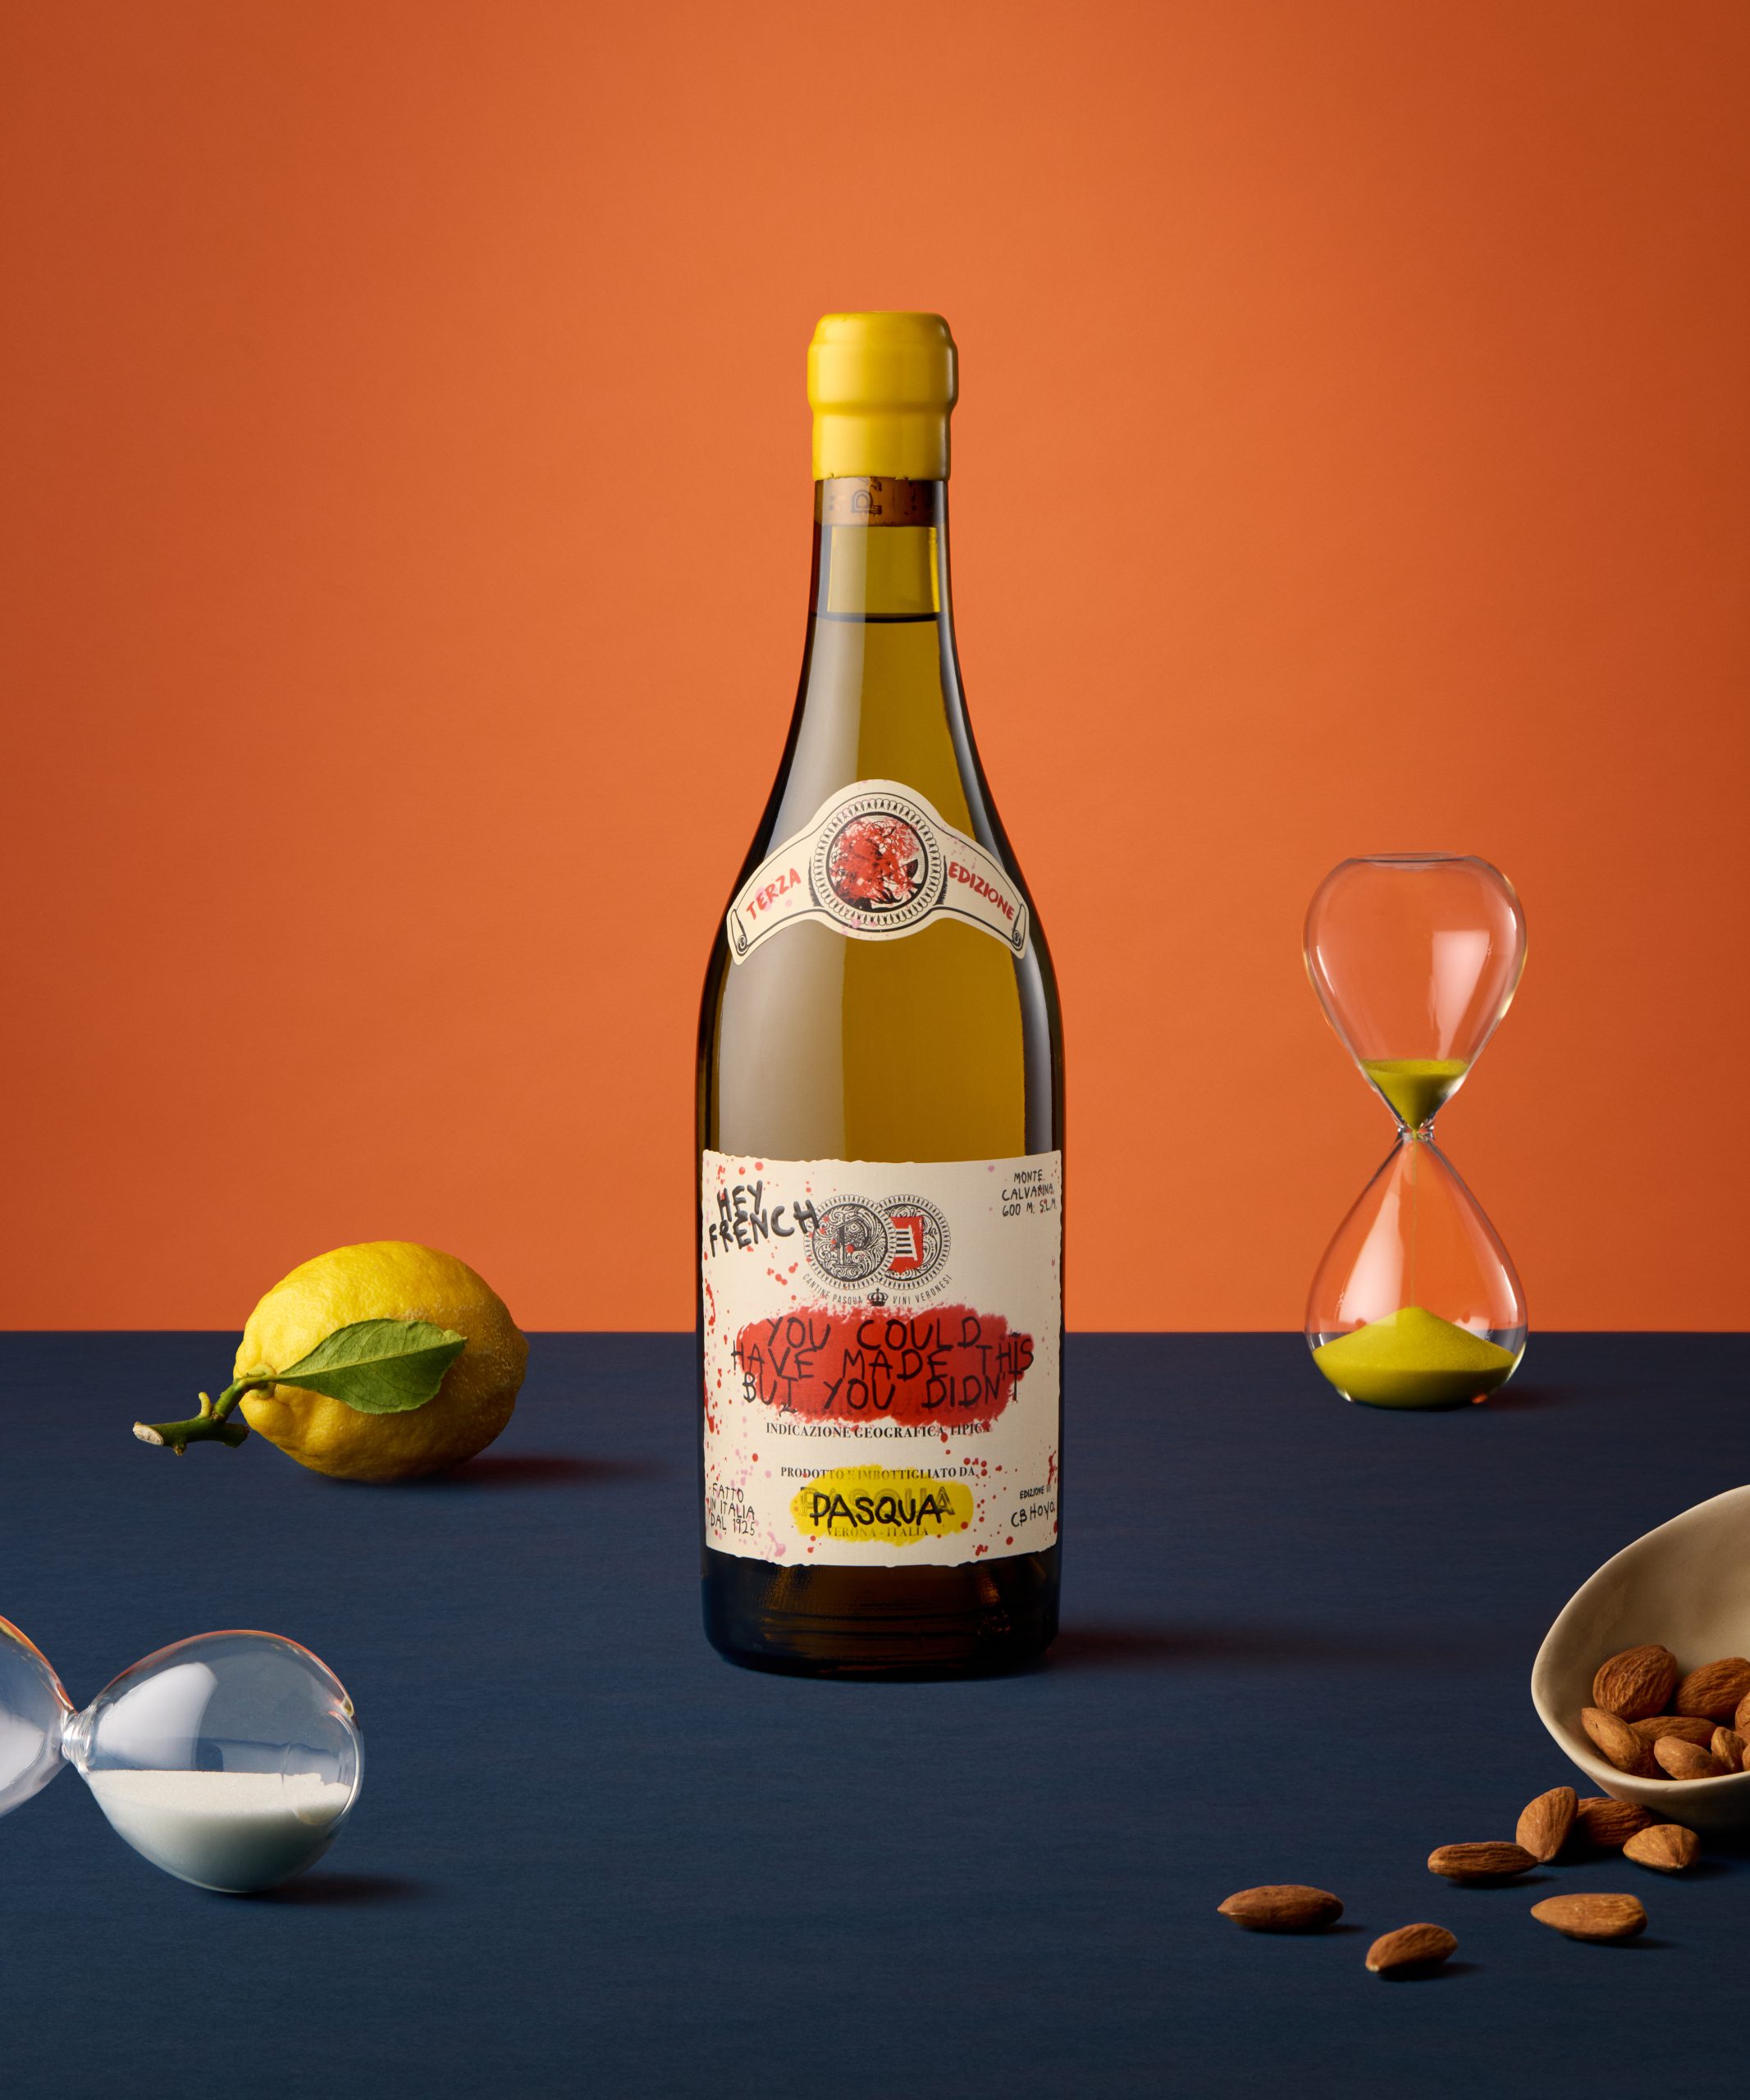 A bottle of Hey French sits on a blue table with an orange background. Hourglasses, a lemon and almonds are also on the table.